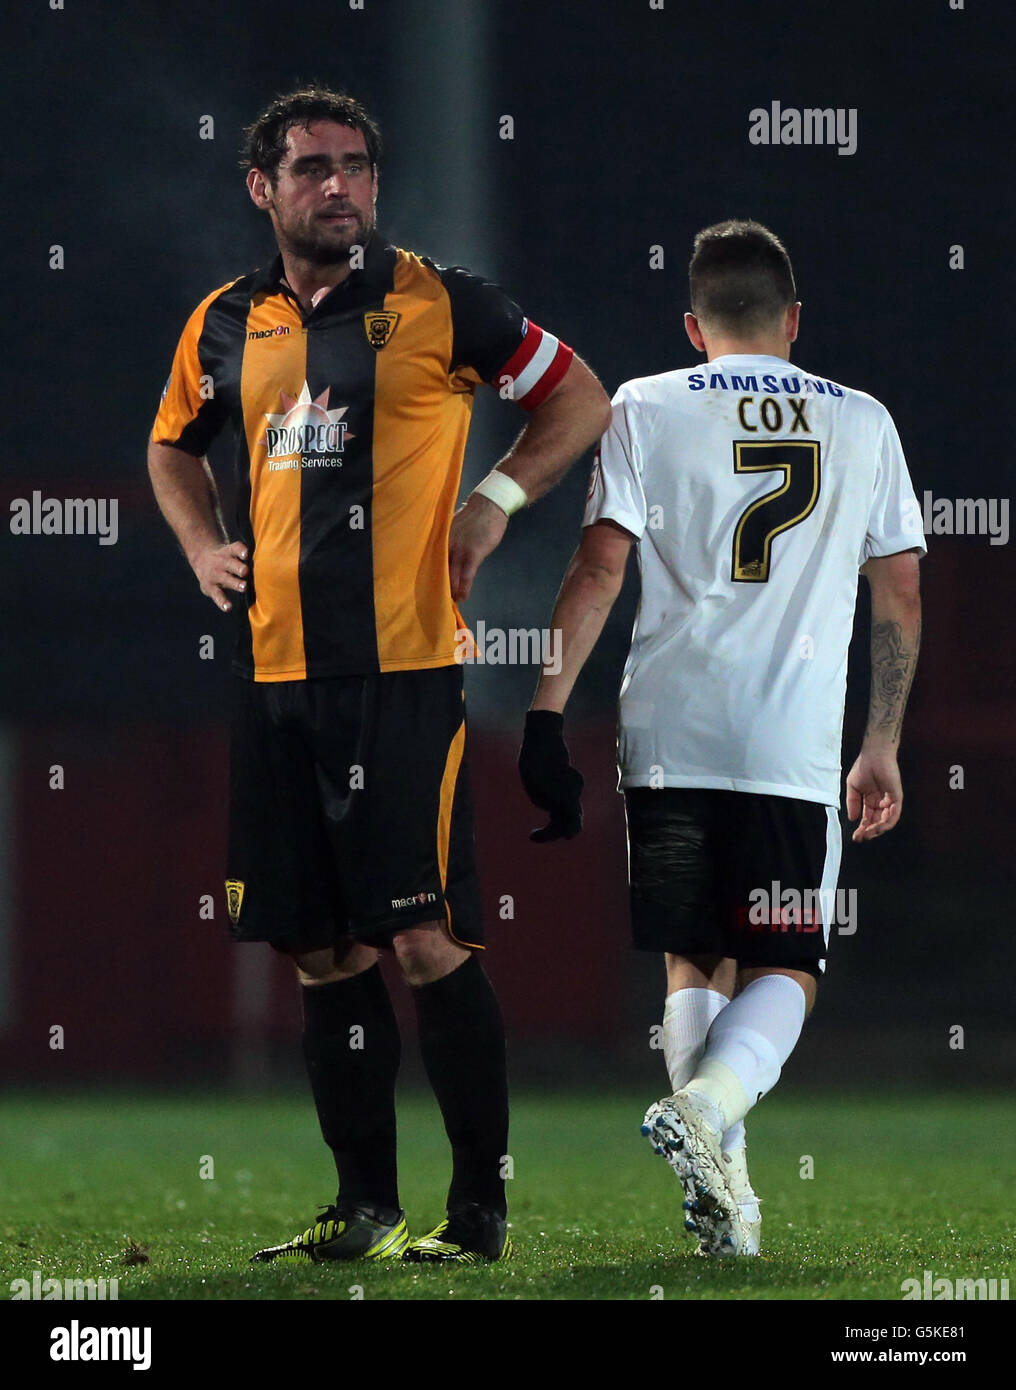 Gloucester City captain Matt Coupe shows his dejection after his error leads to to the 2nd Leyton Orient goal during the FA Cup First Round match at Whaddon Road, Gloucester. Stock Photo